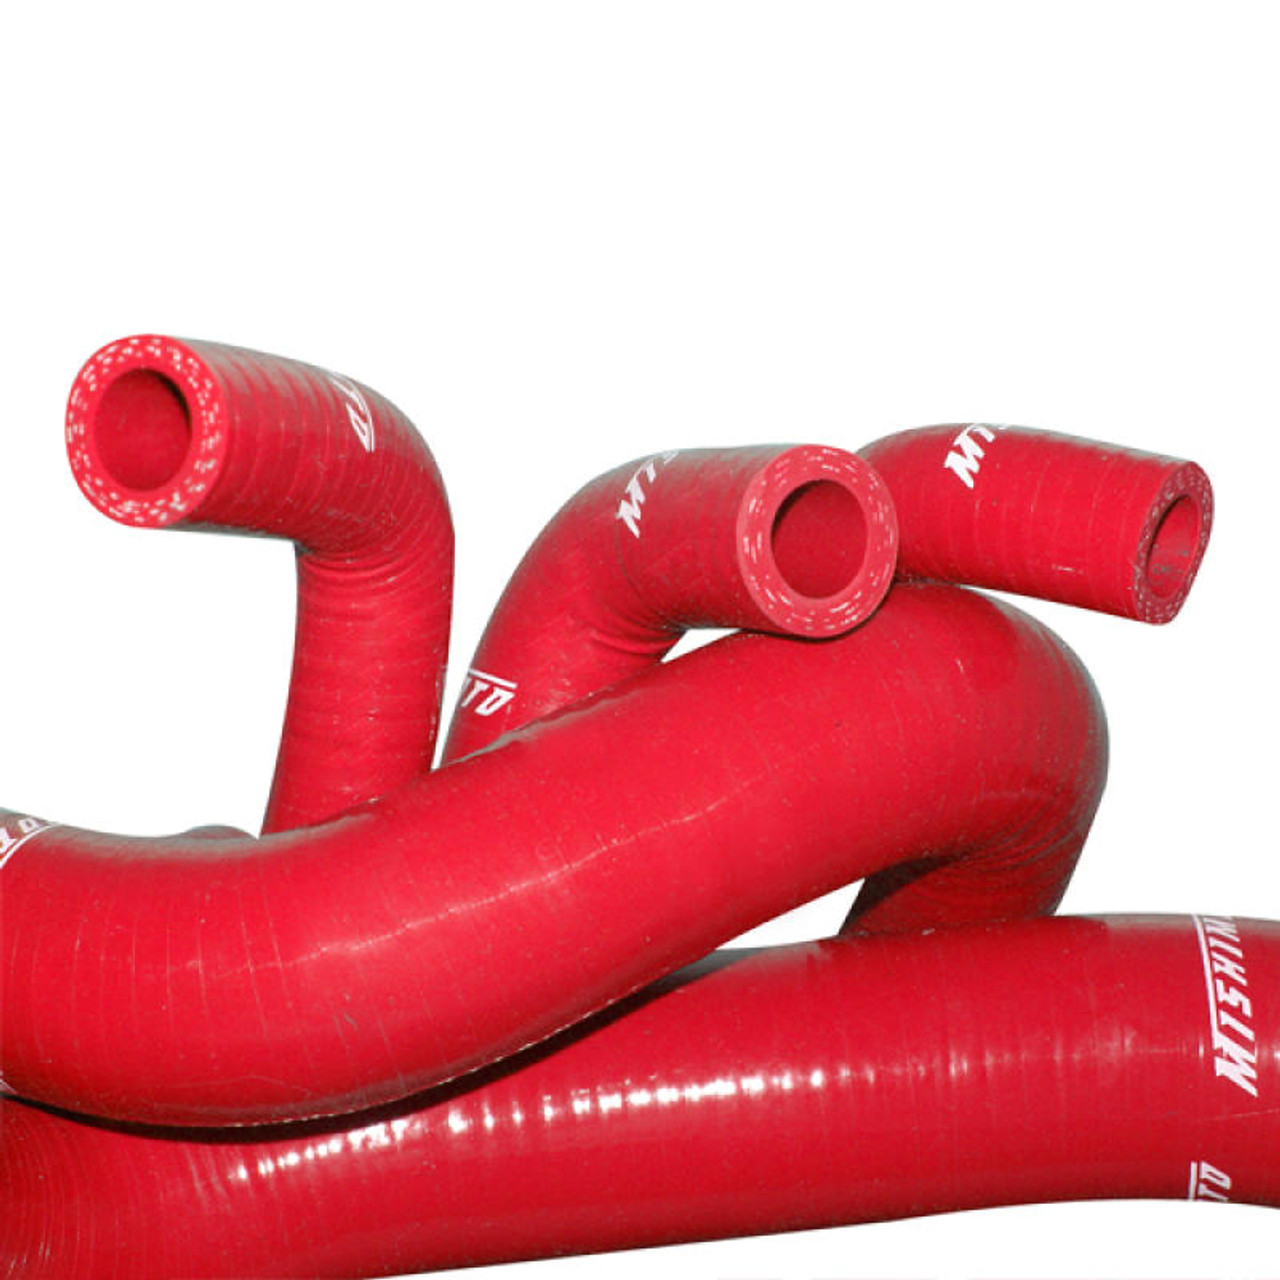 Mishimoto 86-93 Ford Mustang Red Silicone Hose Kit - MMHOSE-MUS-86RD